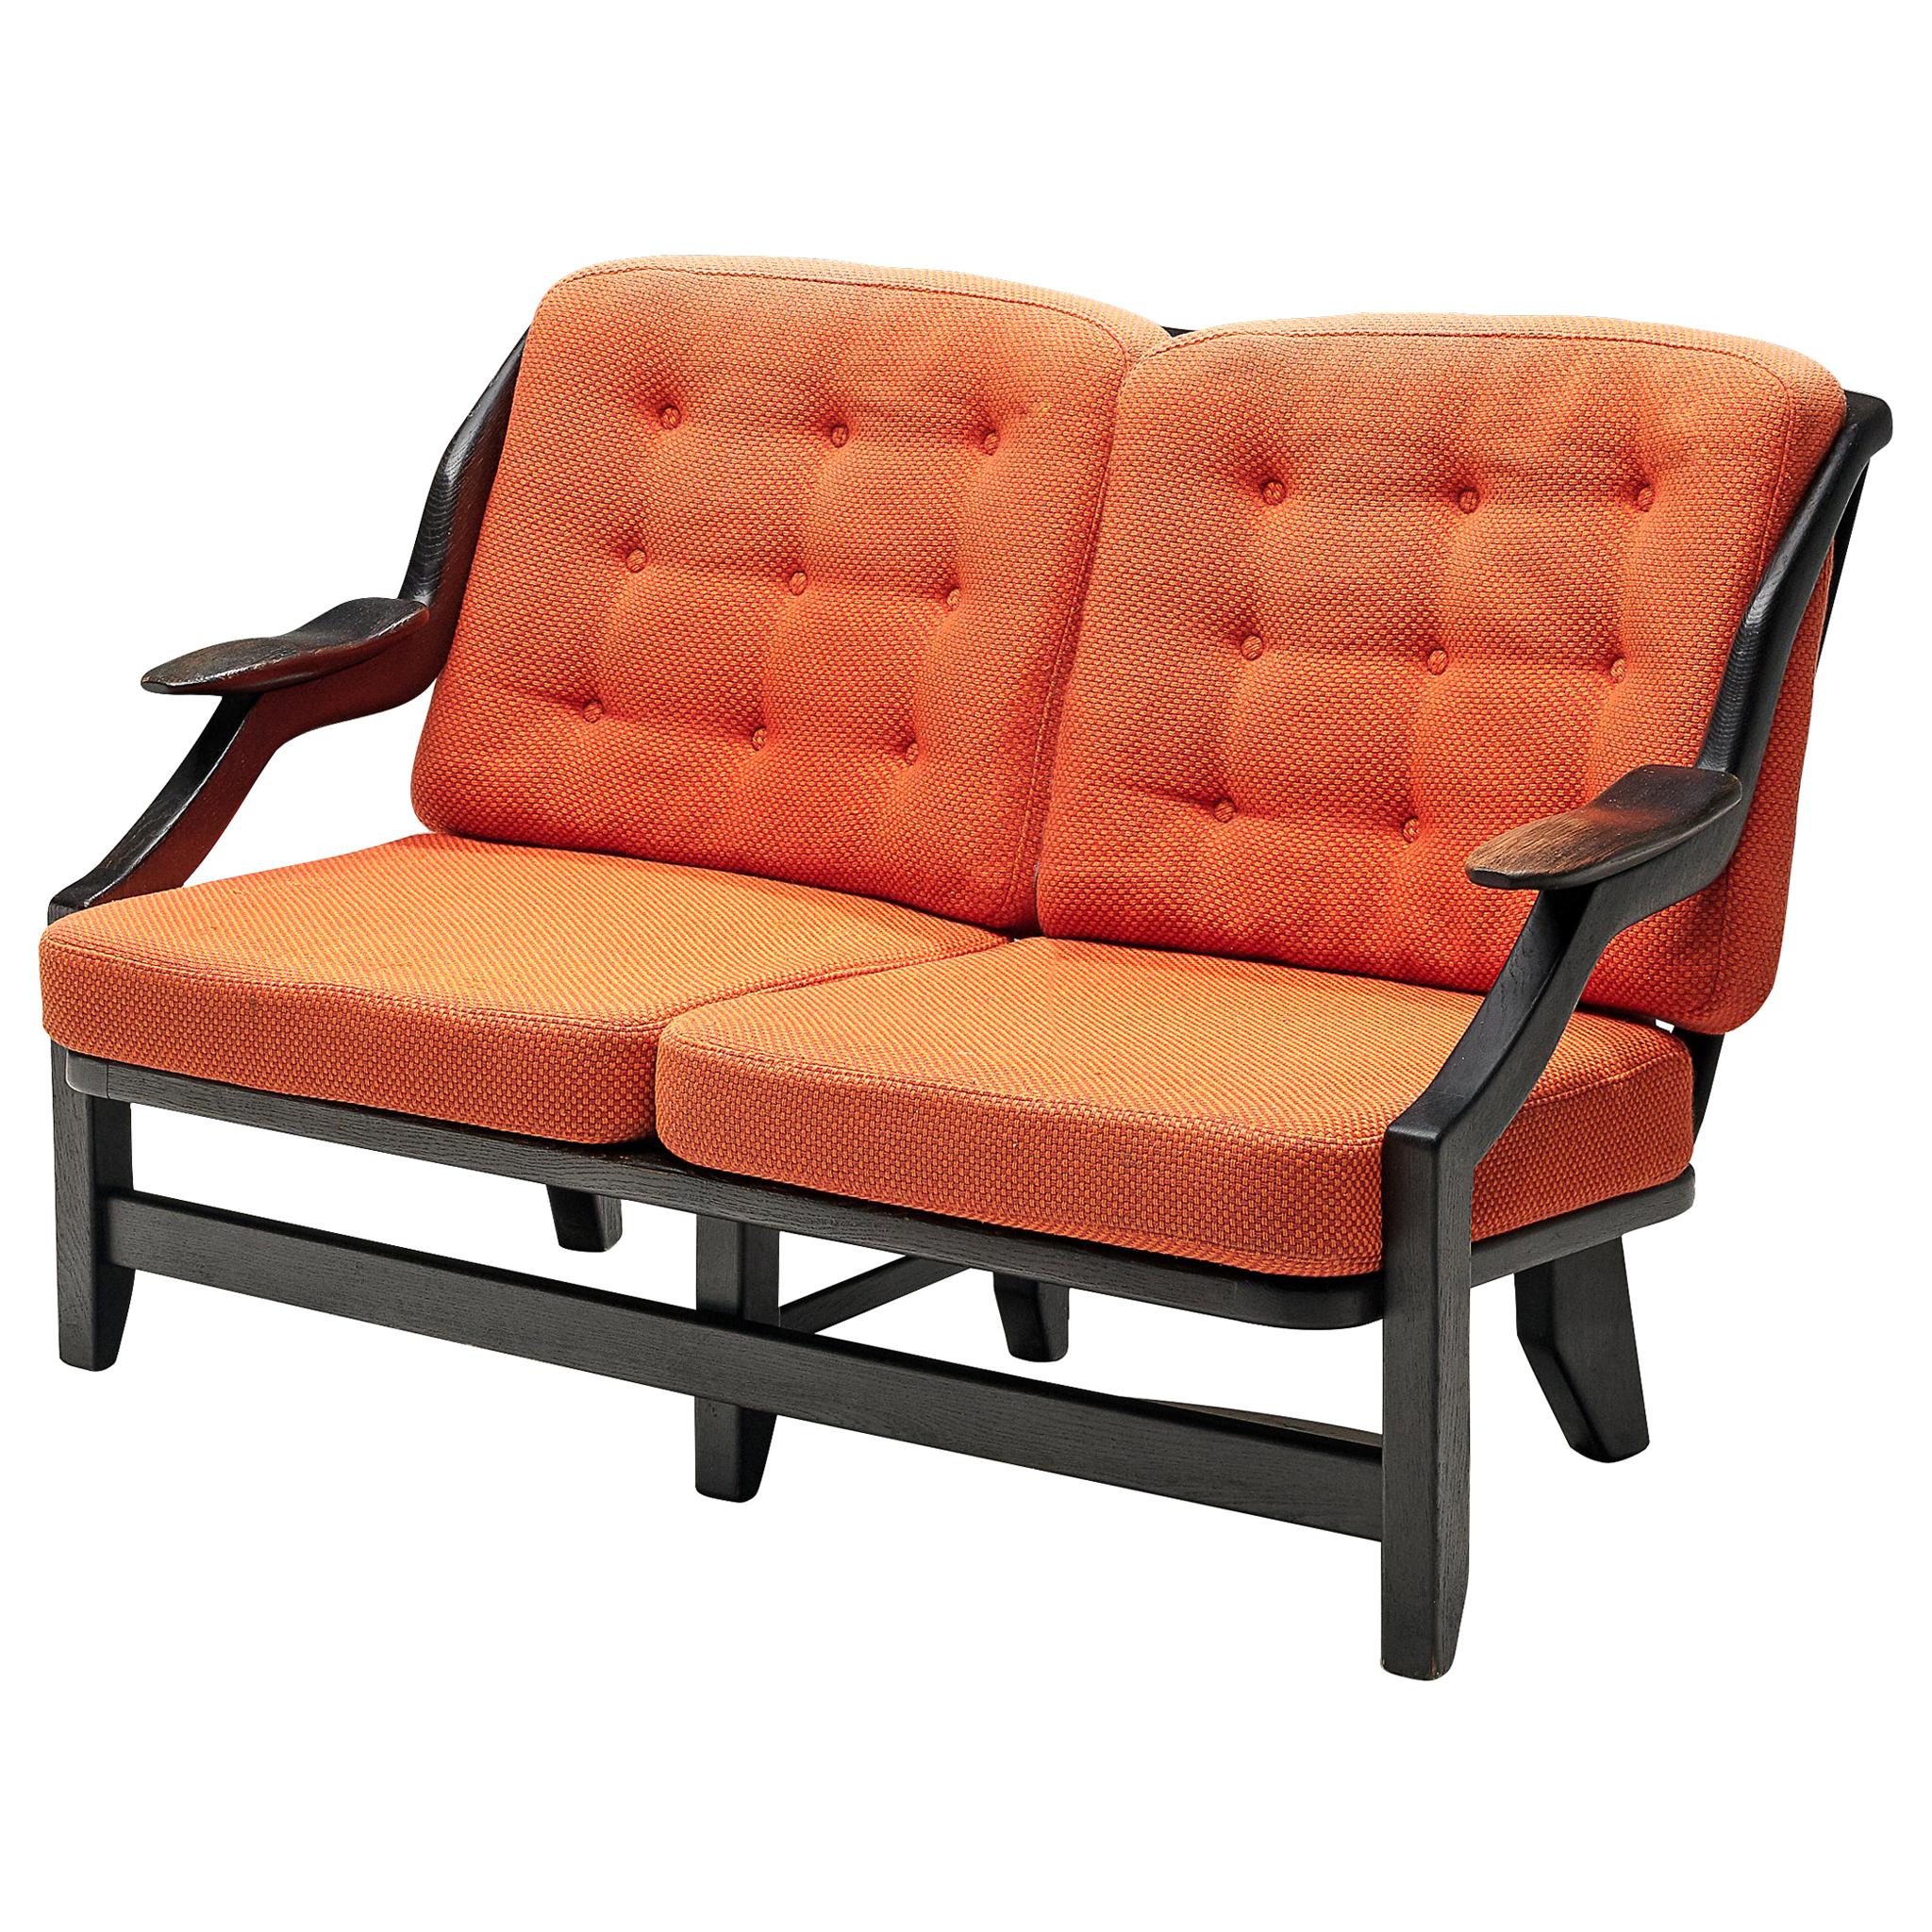 Guillerme & Chambron Sofa with Orange Upholstery